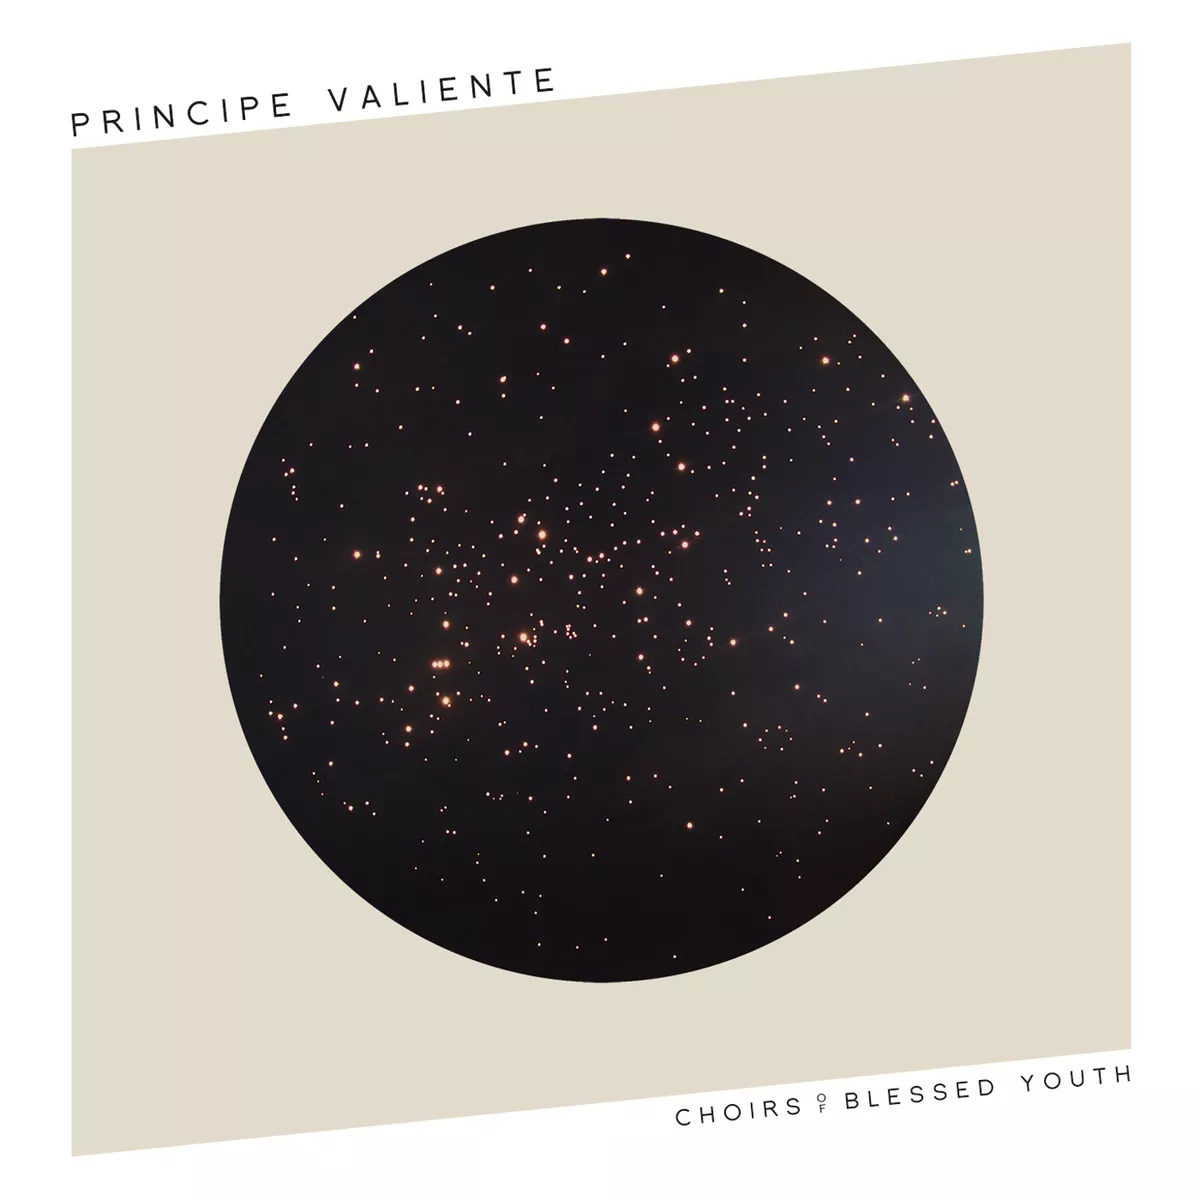 Choirs Of Blessed Youth - Principe Valiente